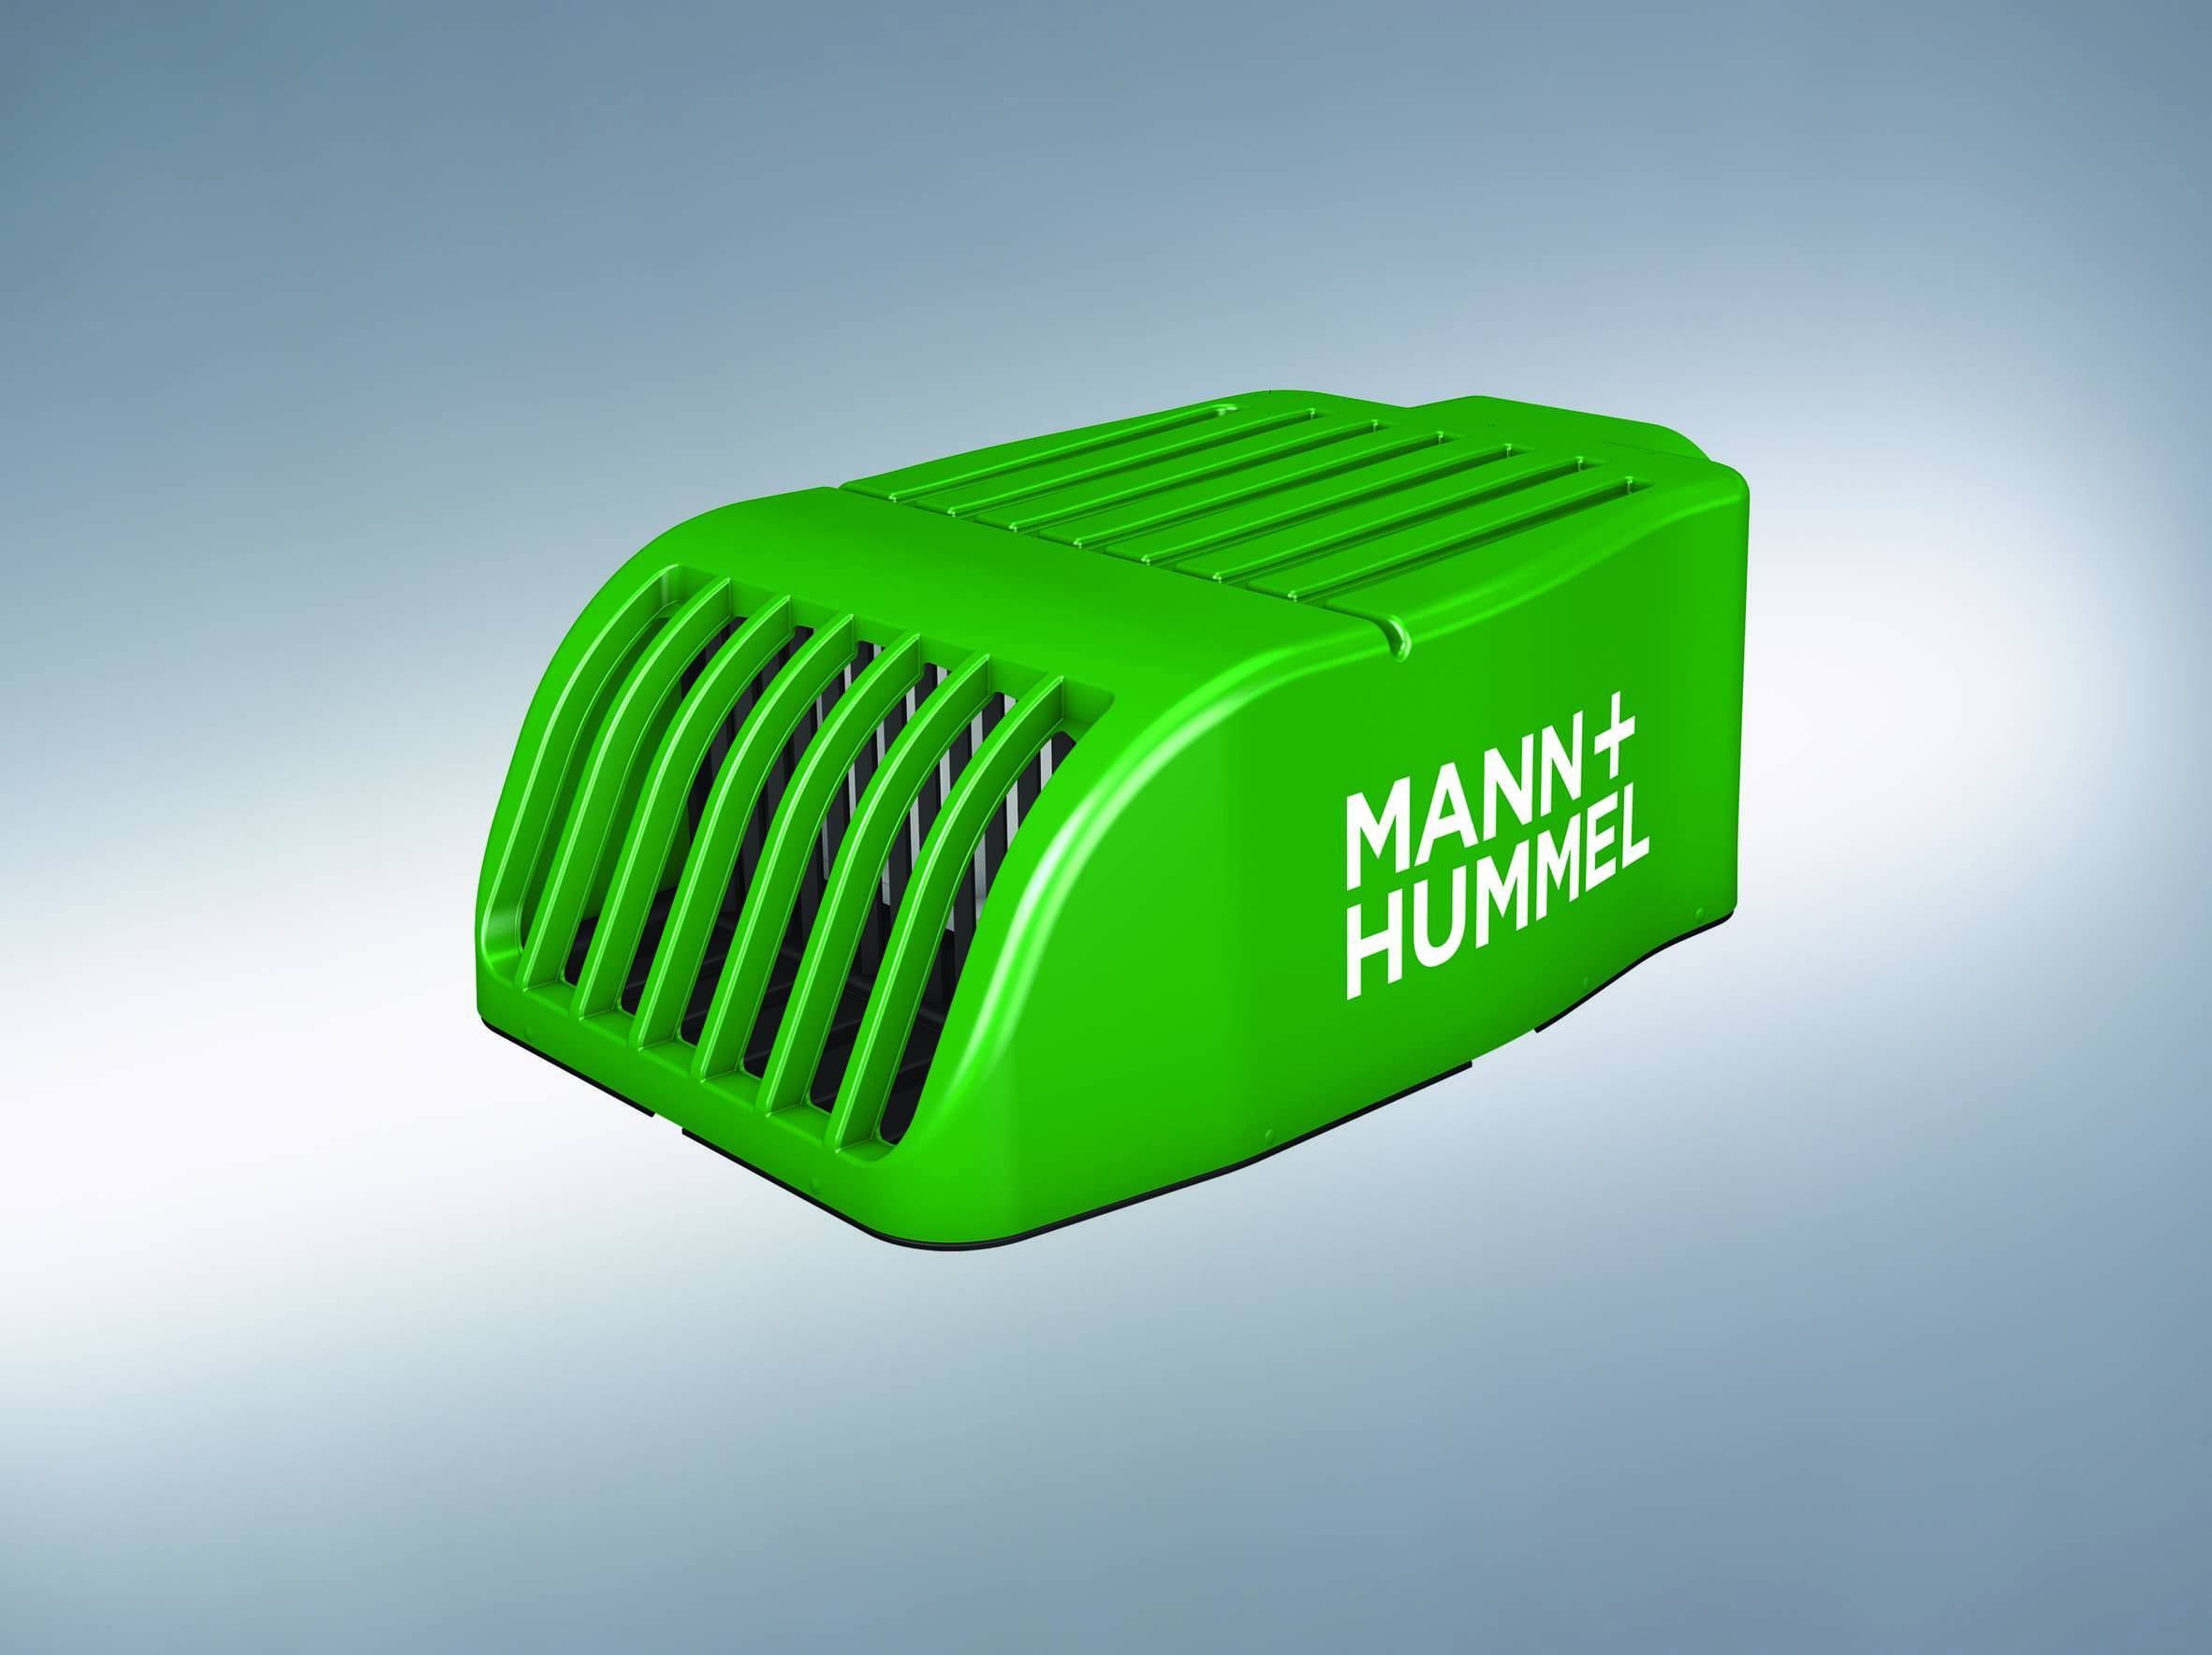 MANN+HUMMEL’s Fine Dust Particle Filter has achieved its targeted separation efficiency.